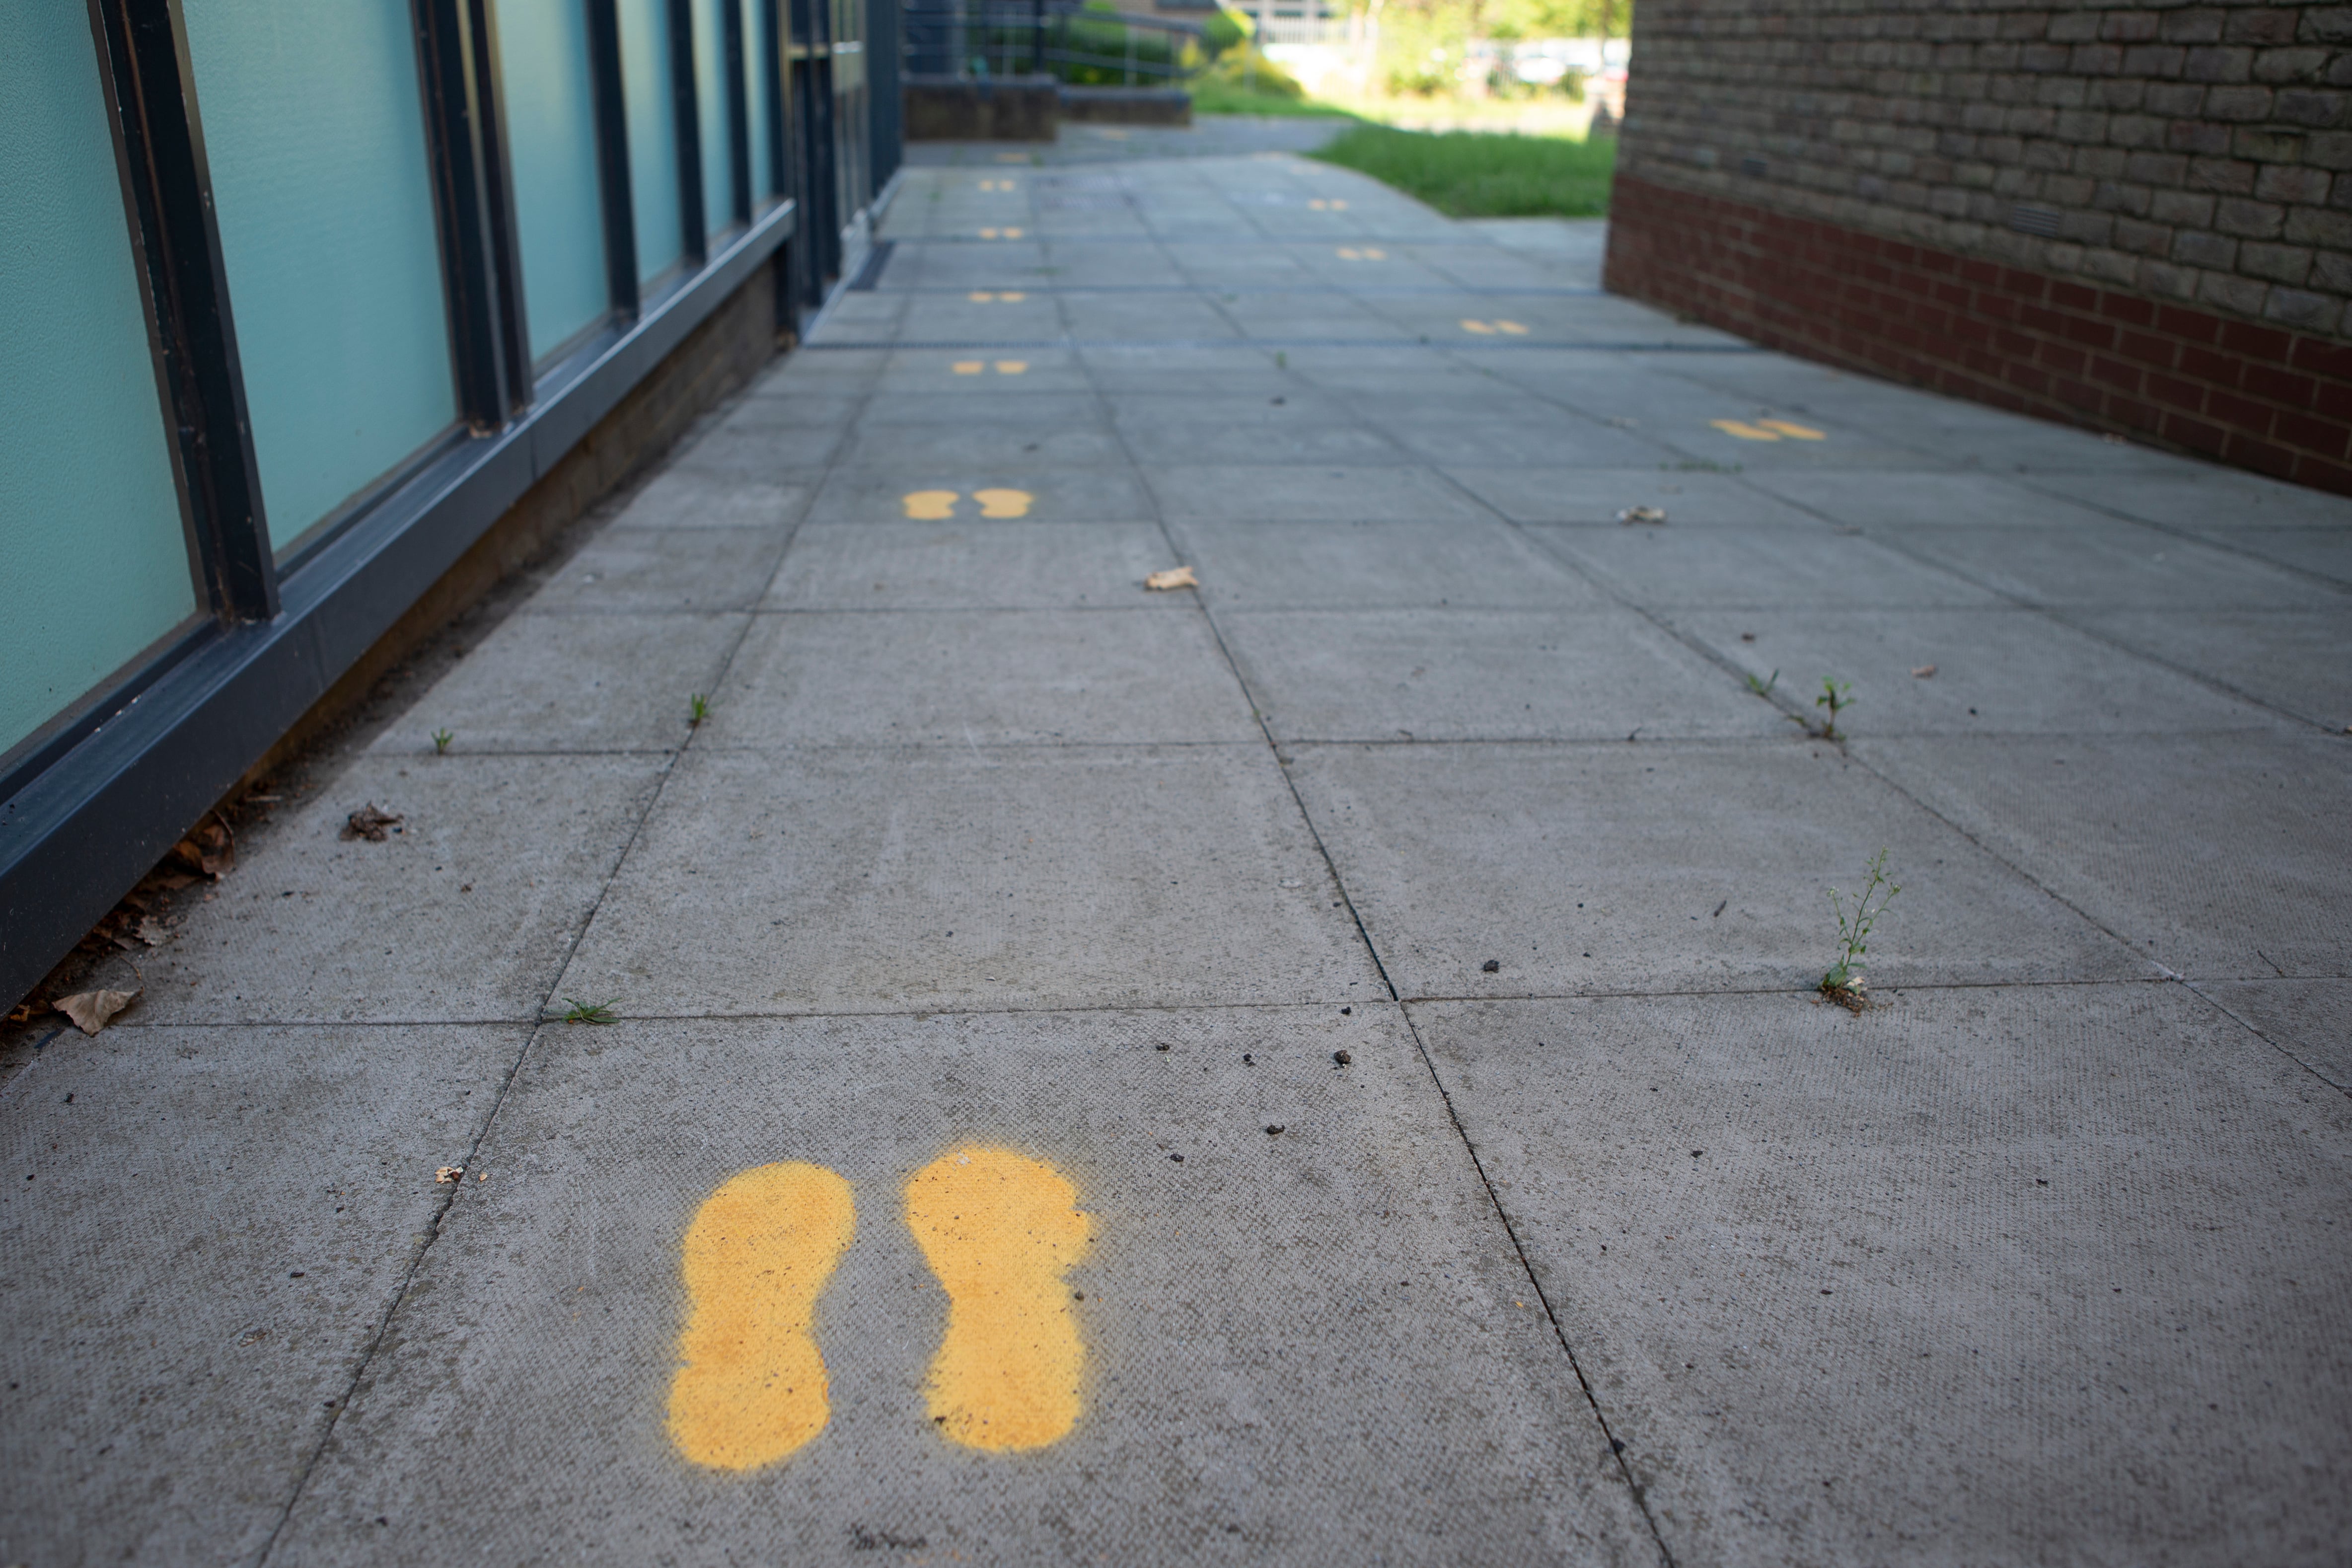 Footprints on the ground in an England school direct students where to go. 